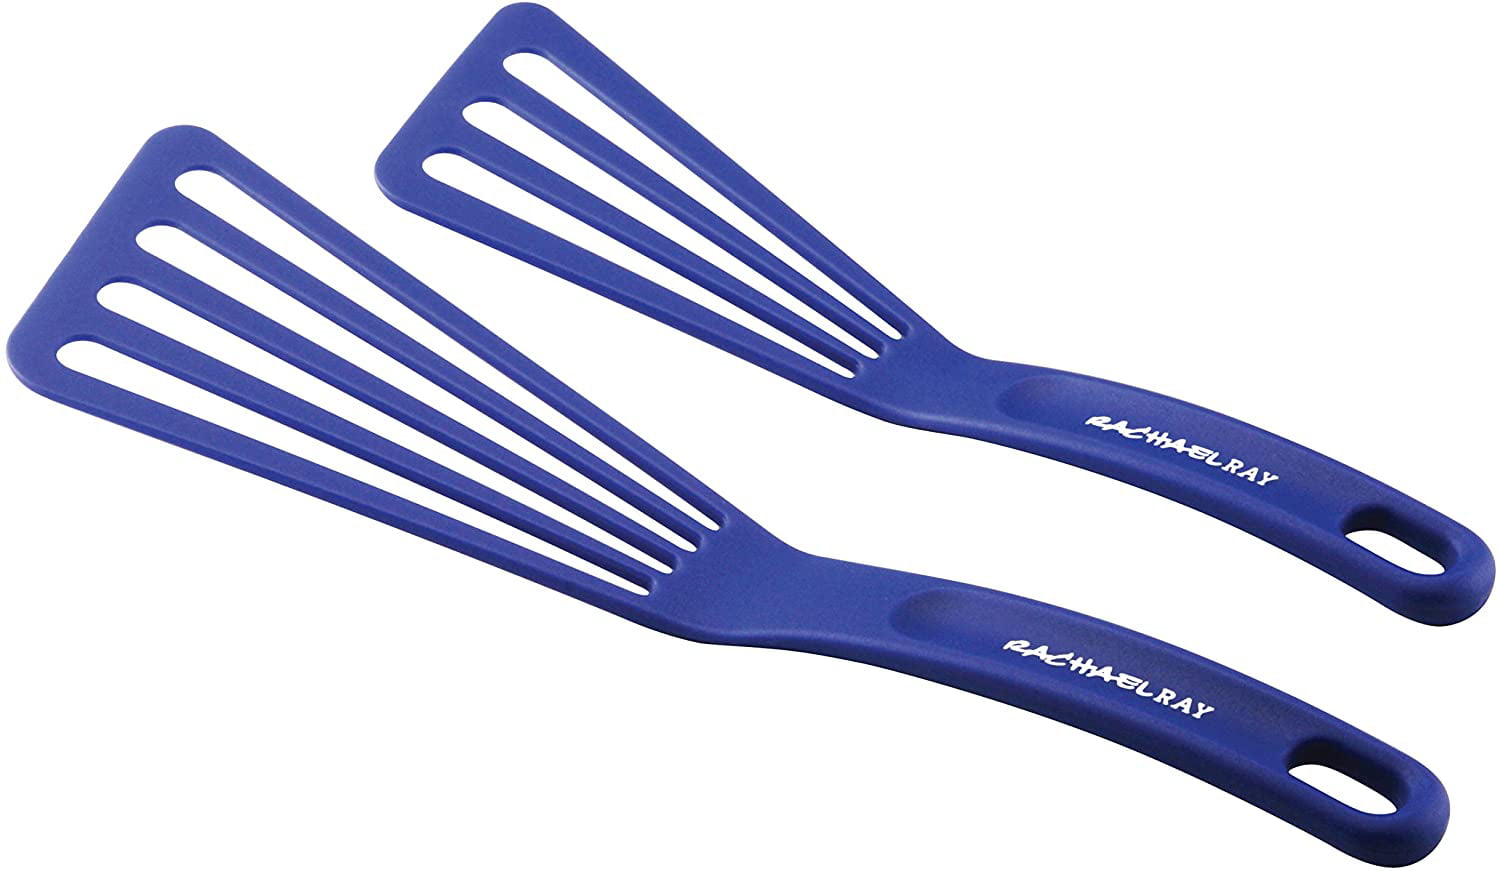 Kitchen Tools and Gadgets Nylon Cooking Utensils Fish Turner Spatula 2 Piece Blue 